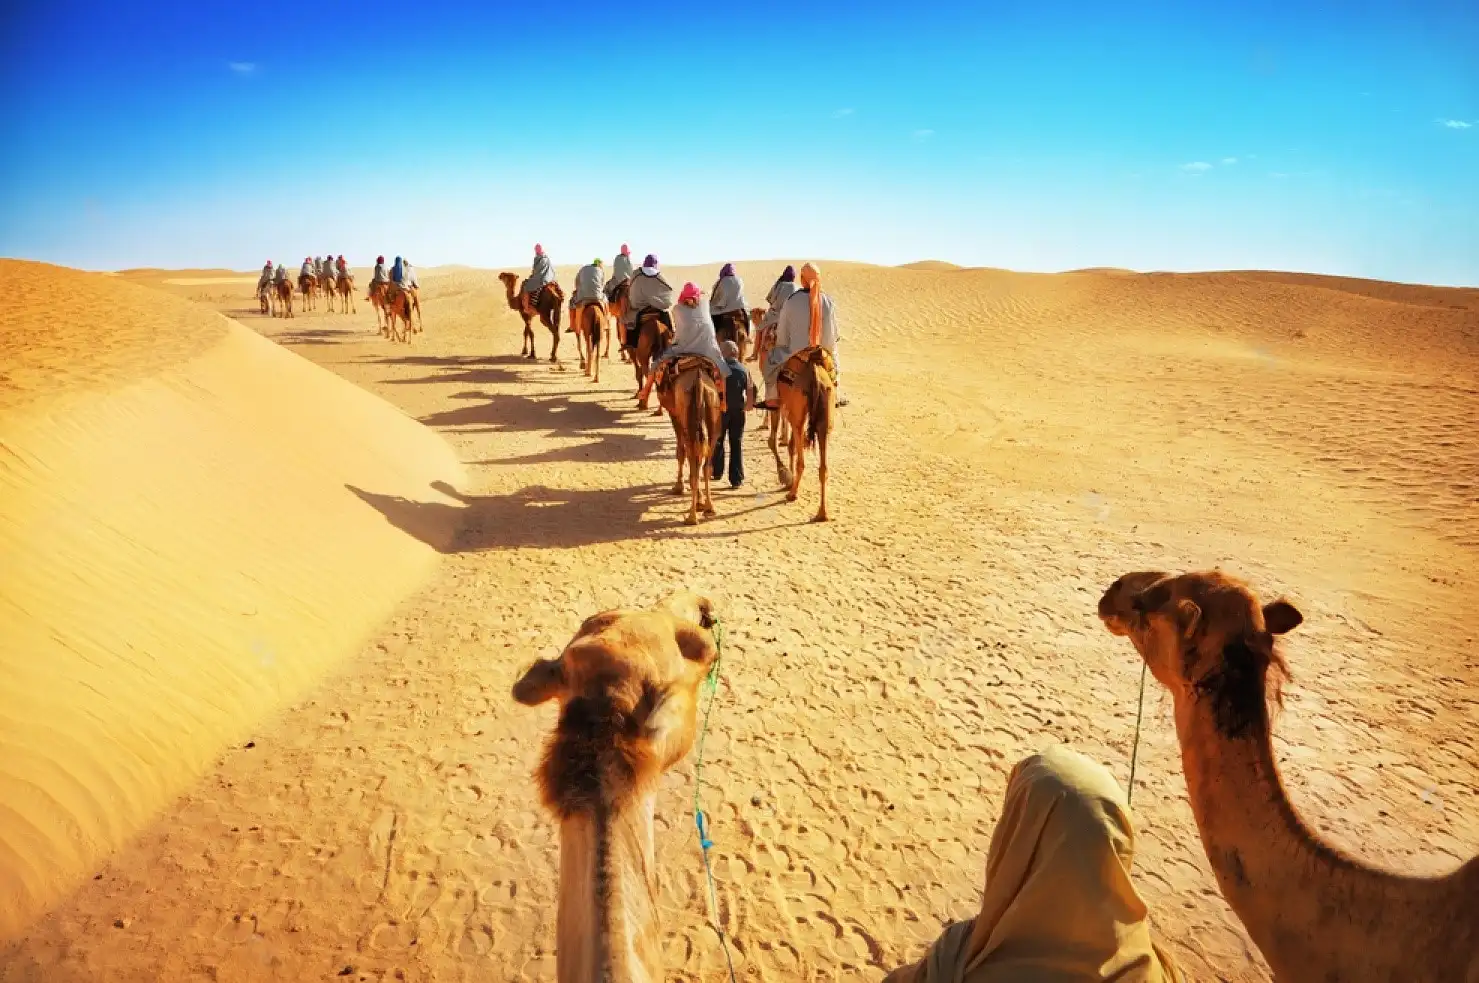 Things-to-do-in-Marrakech-with-Family-Camel-ride-in-sahara-desert.webp